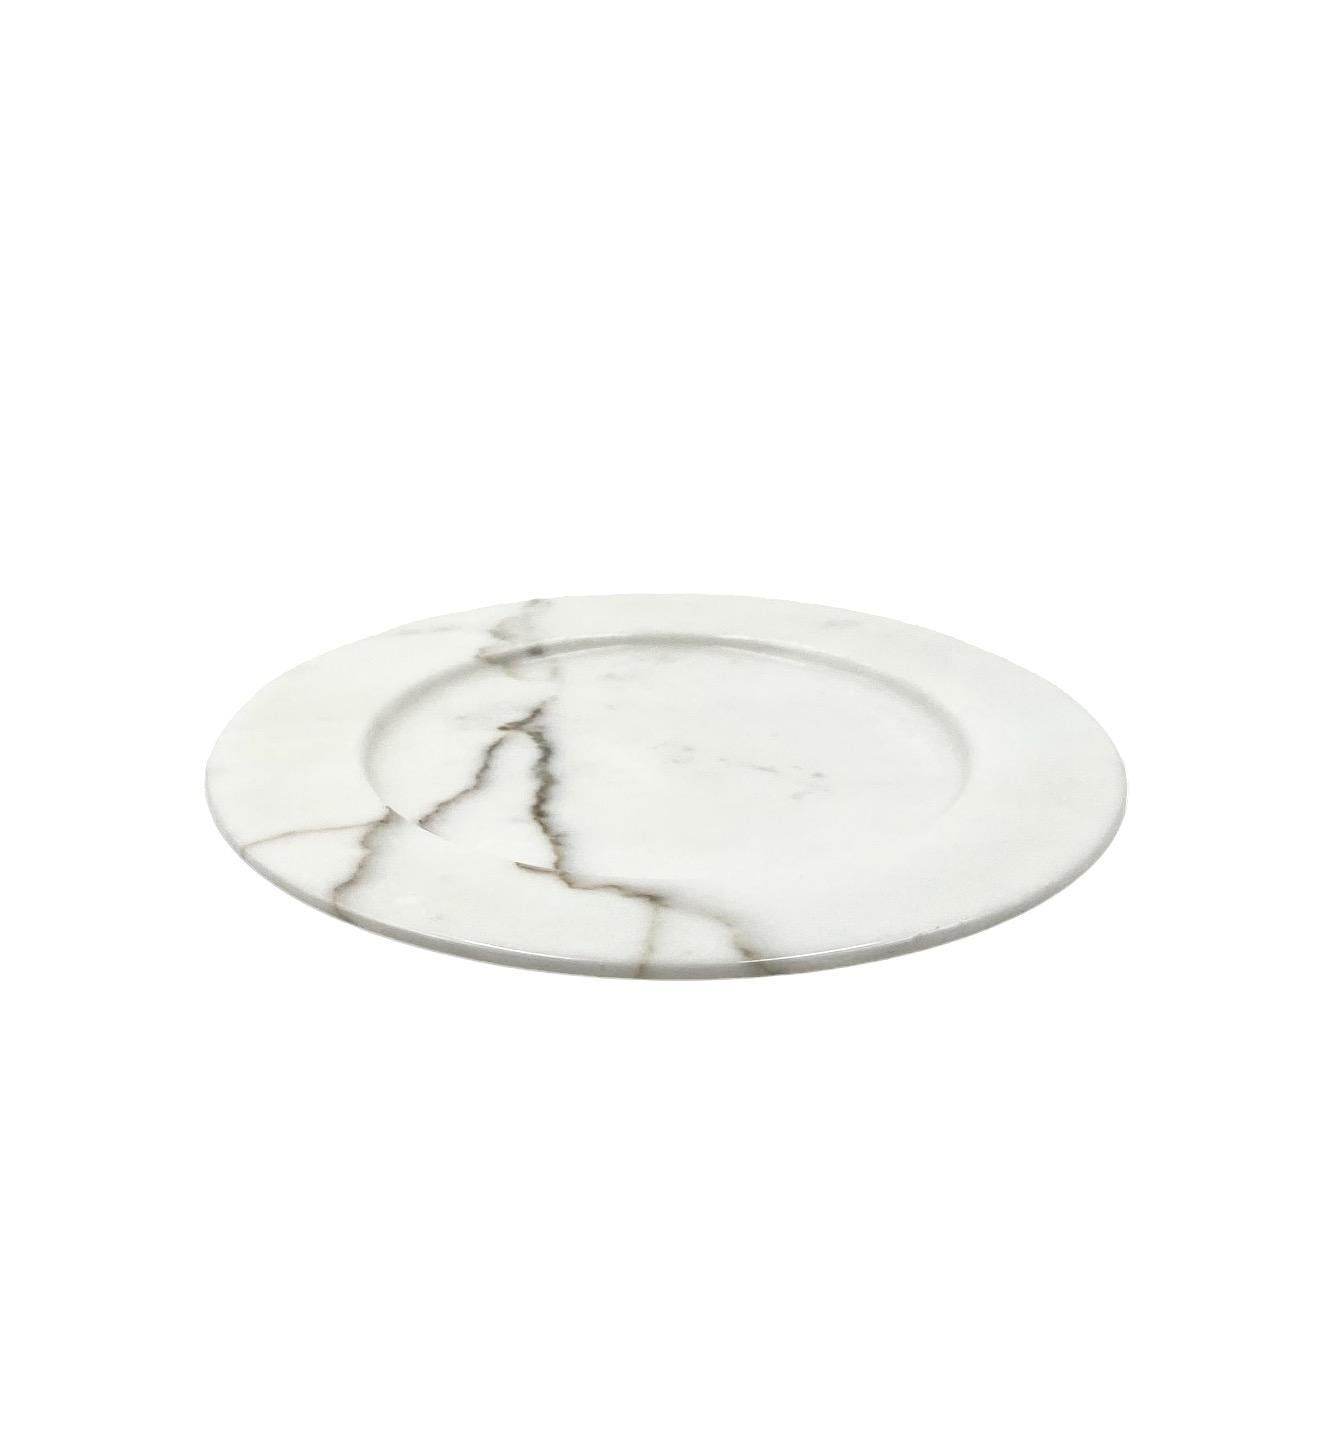 White Carrara marble centerpiece / plate, Up&Up Italy, 1970s For Sale 1